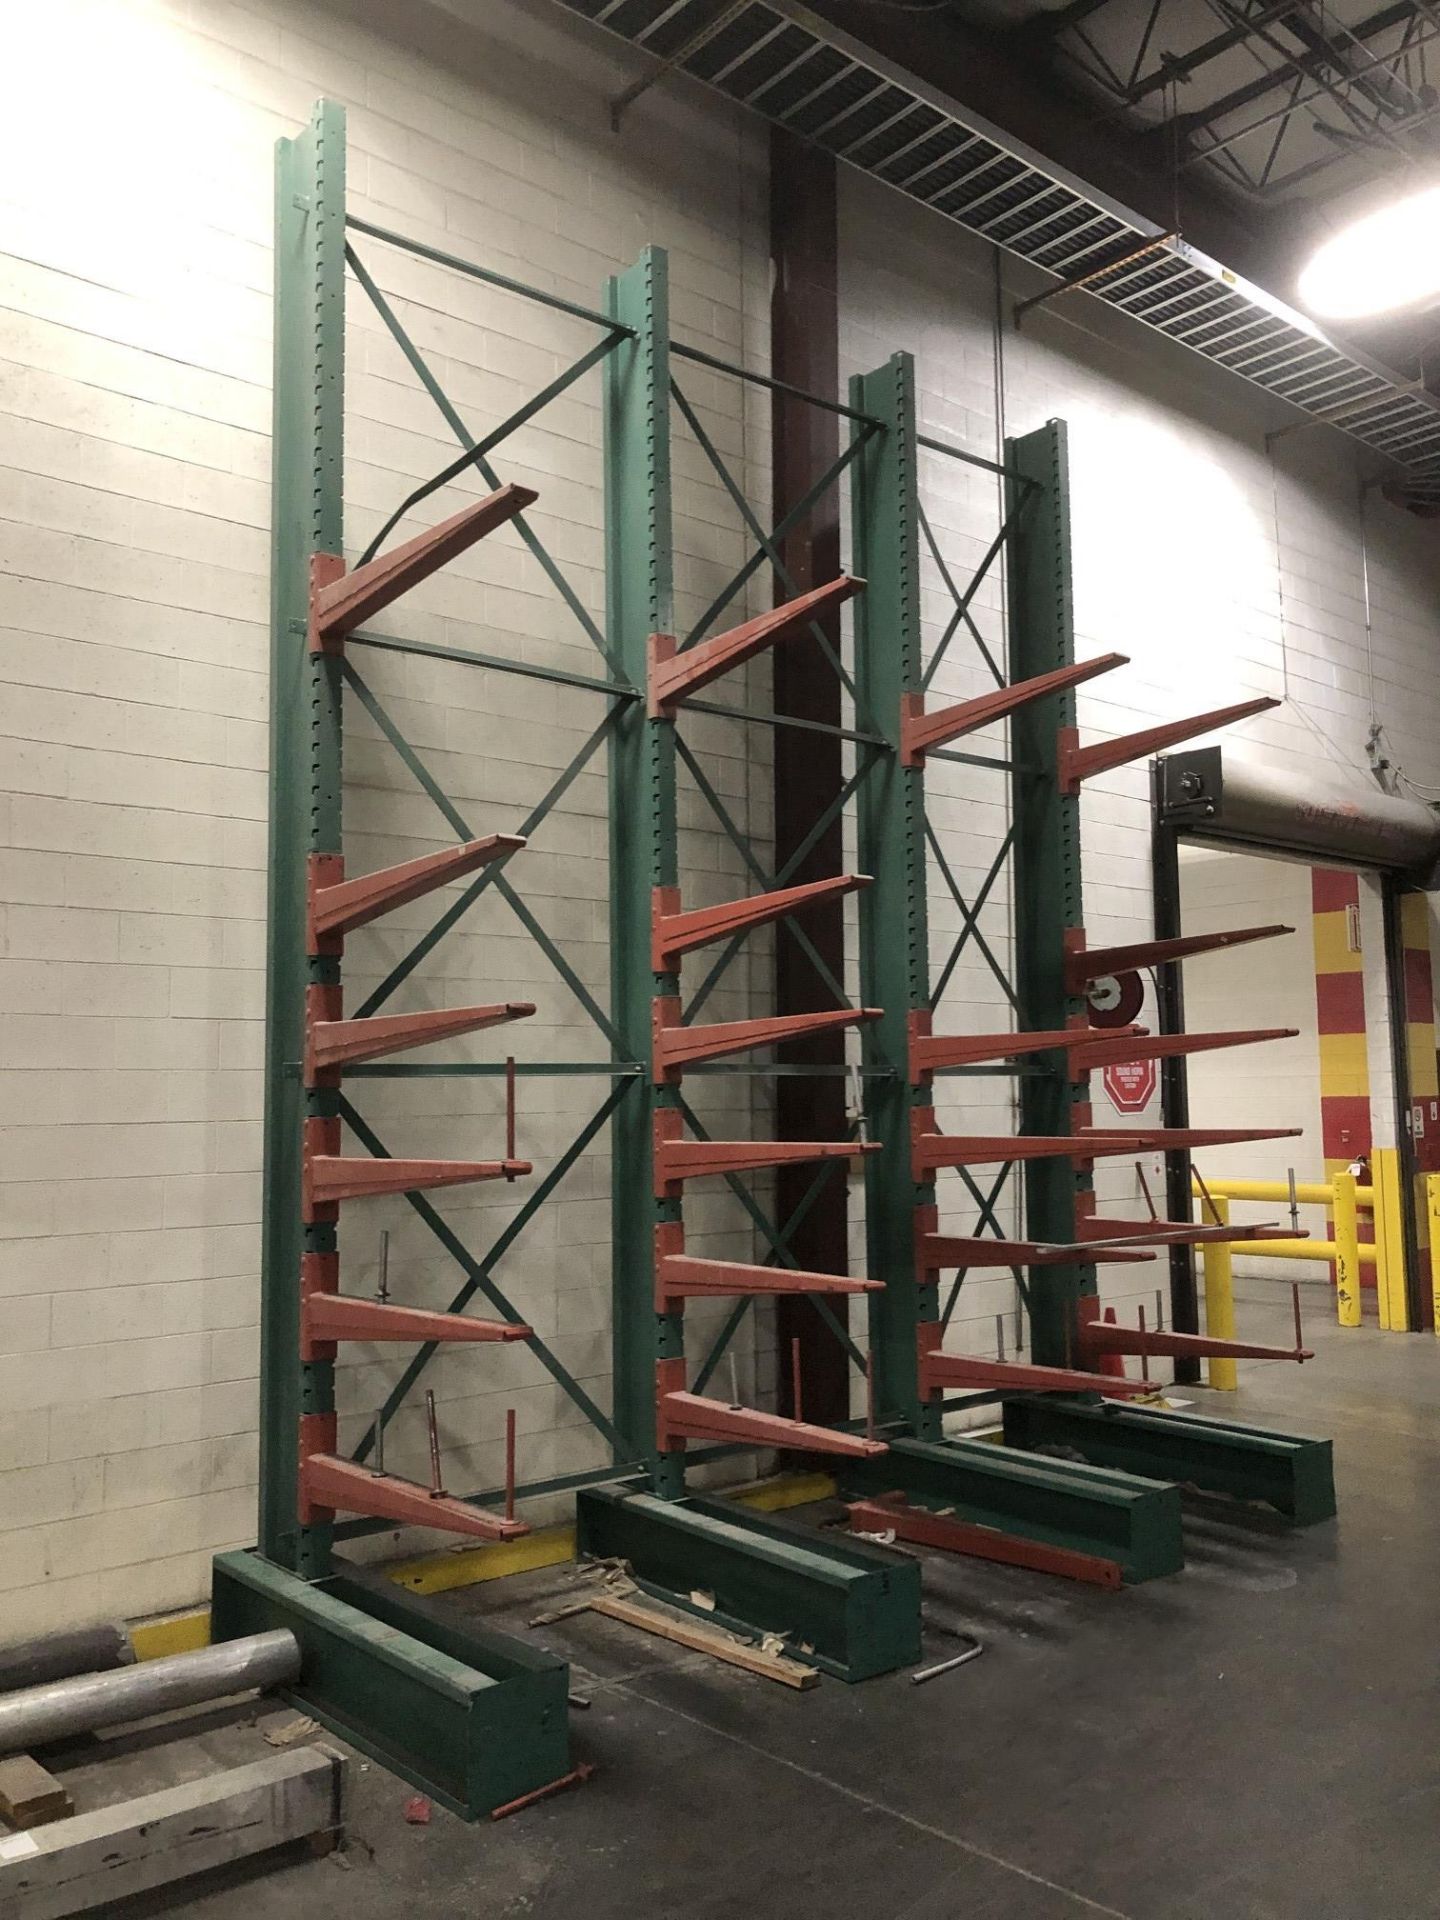 Cantilever Rack (18' High x 14' Wide x 4' Arms) - Image 2 of 2